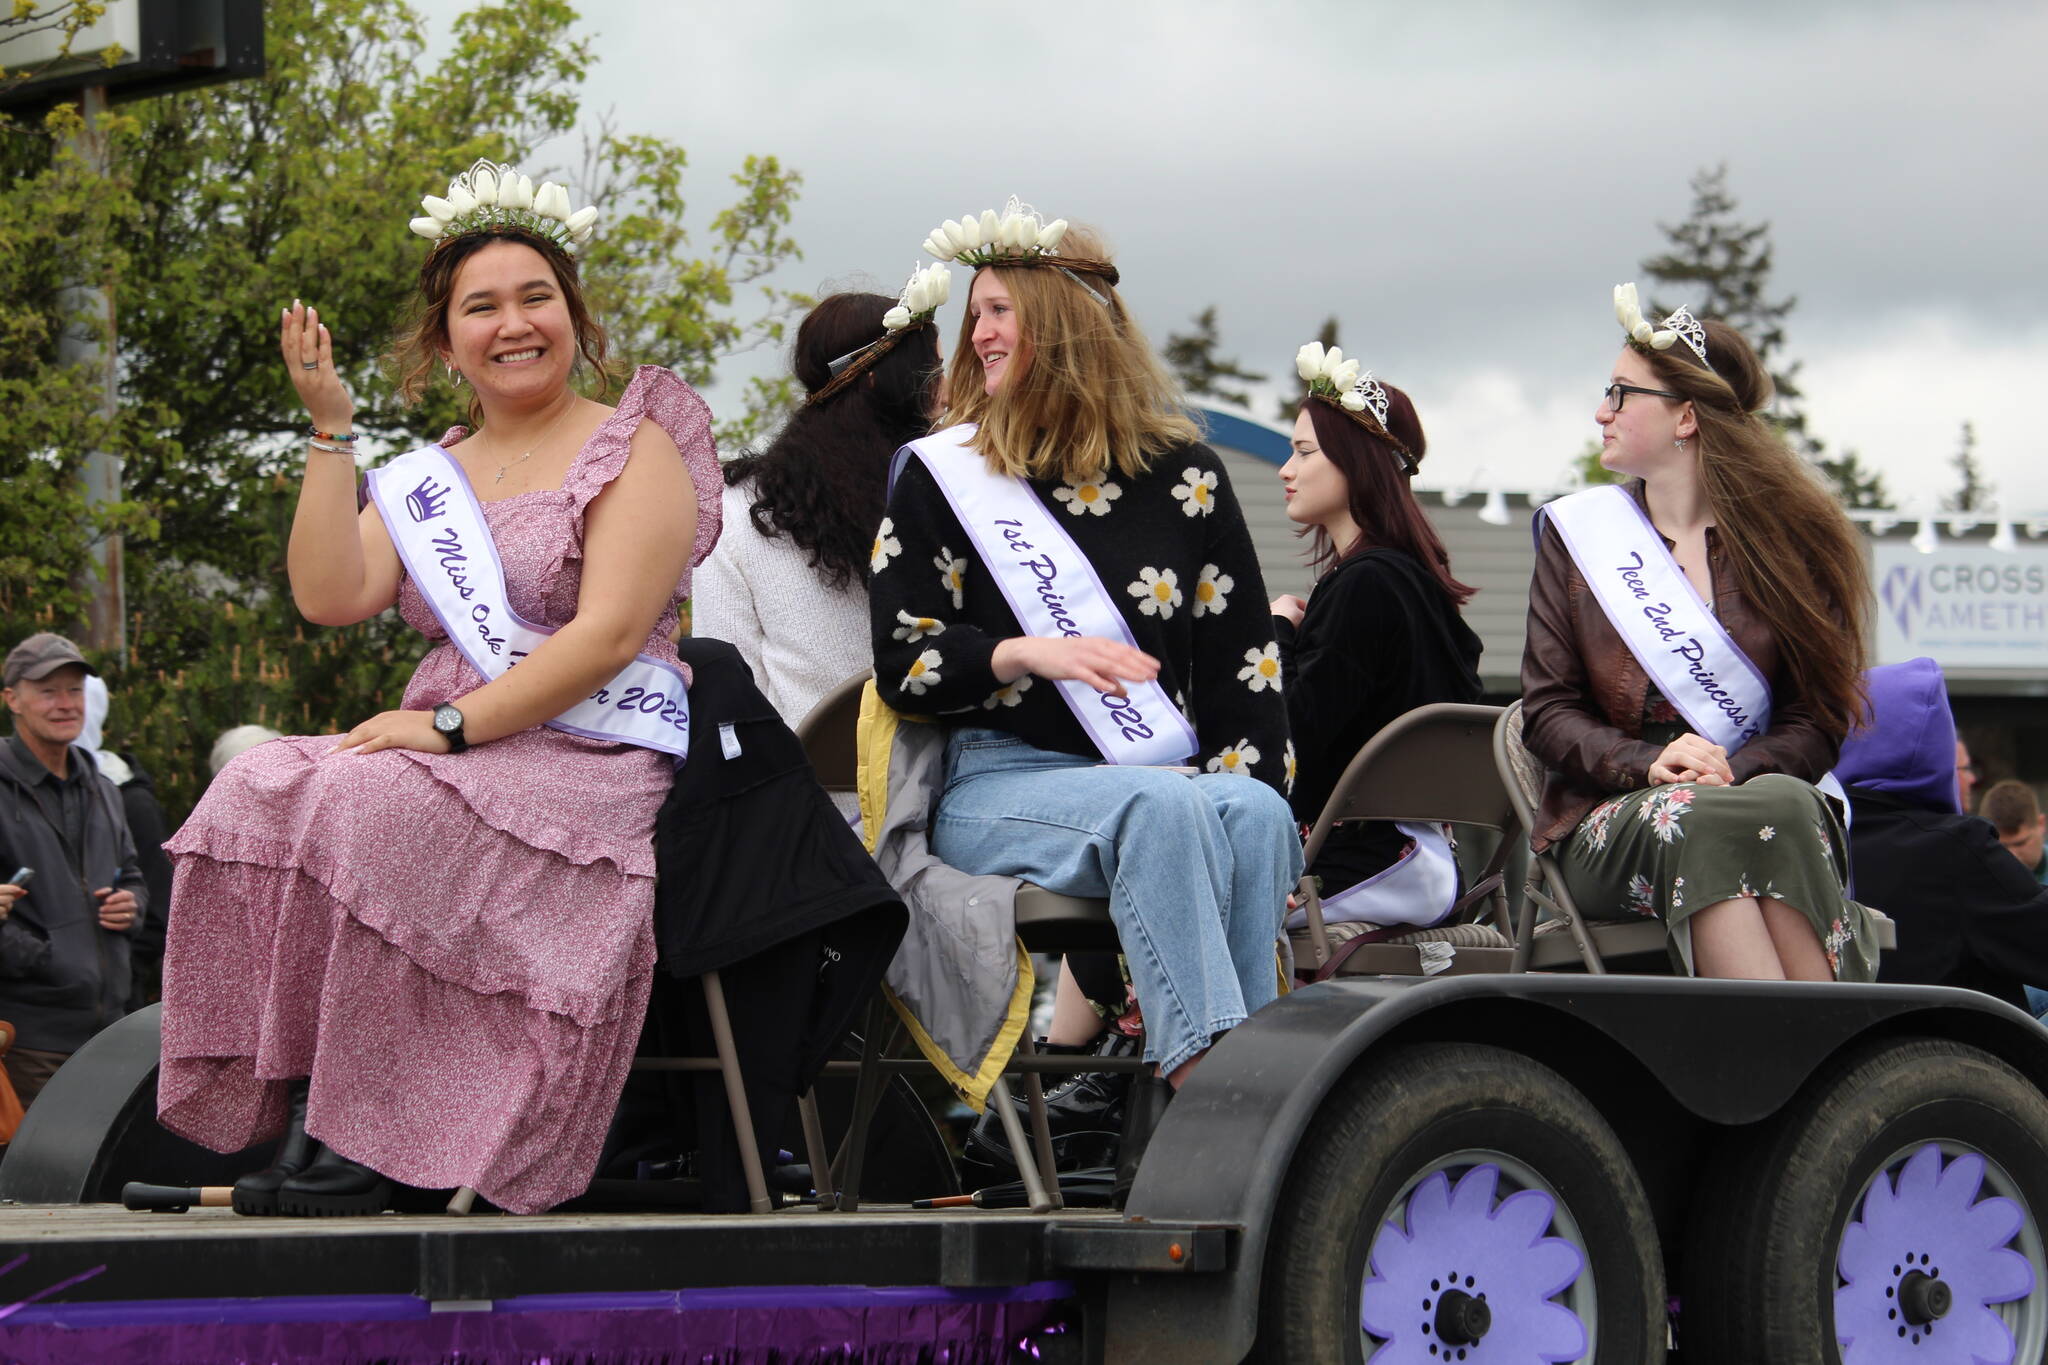 Miss Oak Harbor Thinalyn Ramier and her court ride by on a float. (Photo by Karina Andrew/Whidbey News-Times)